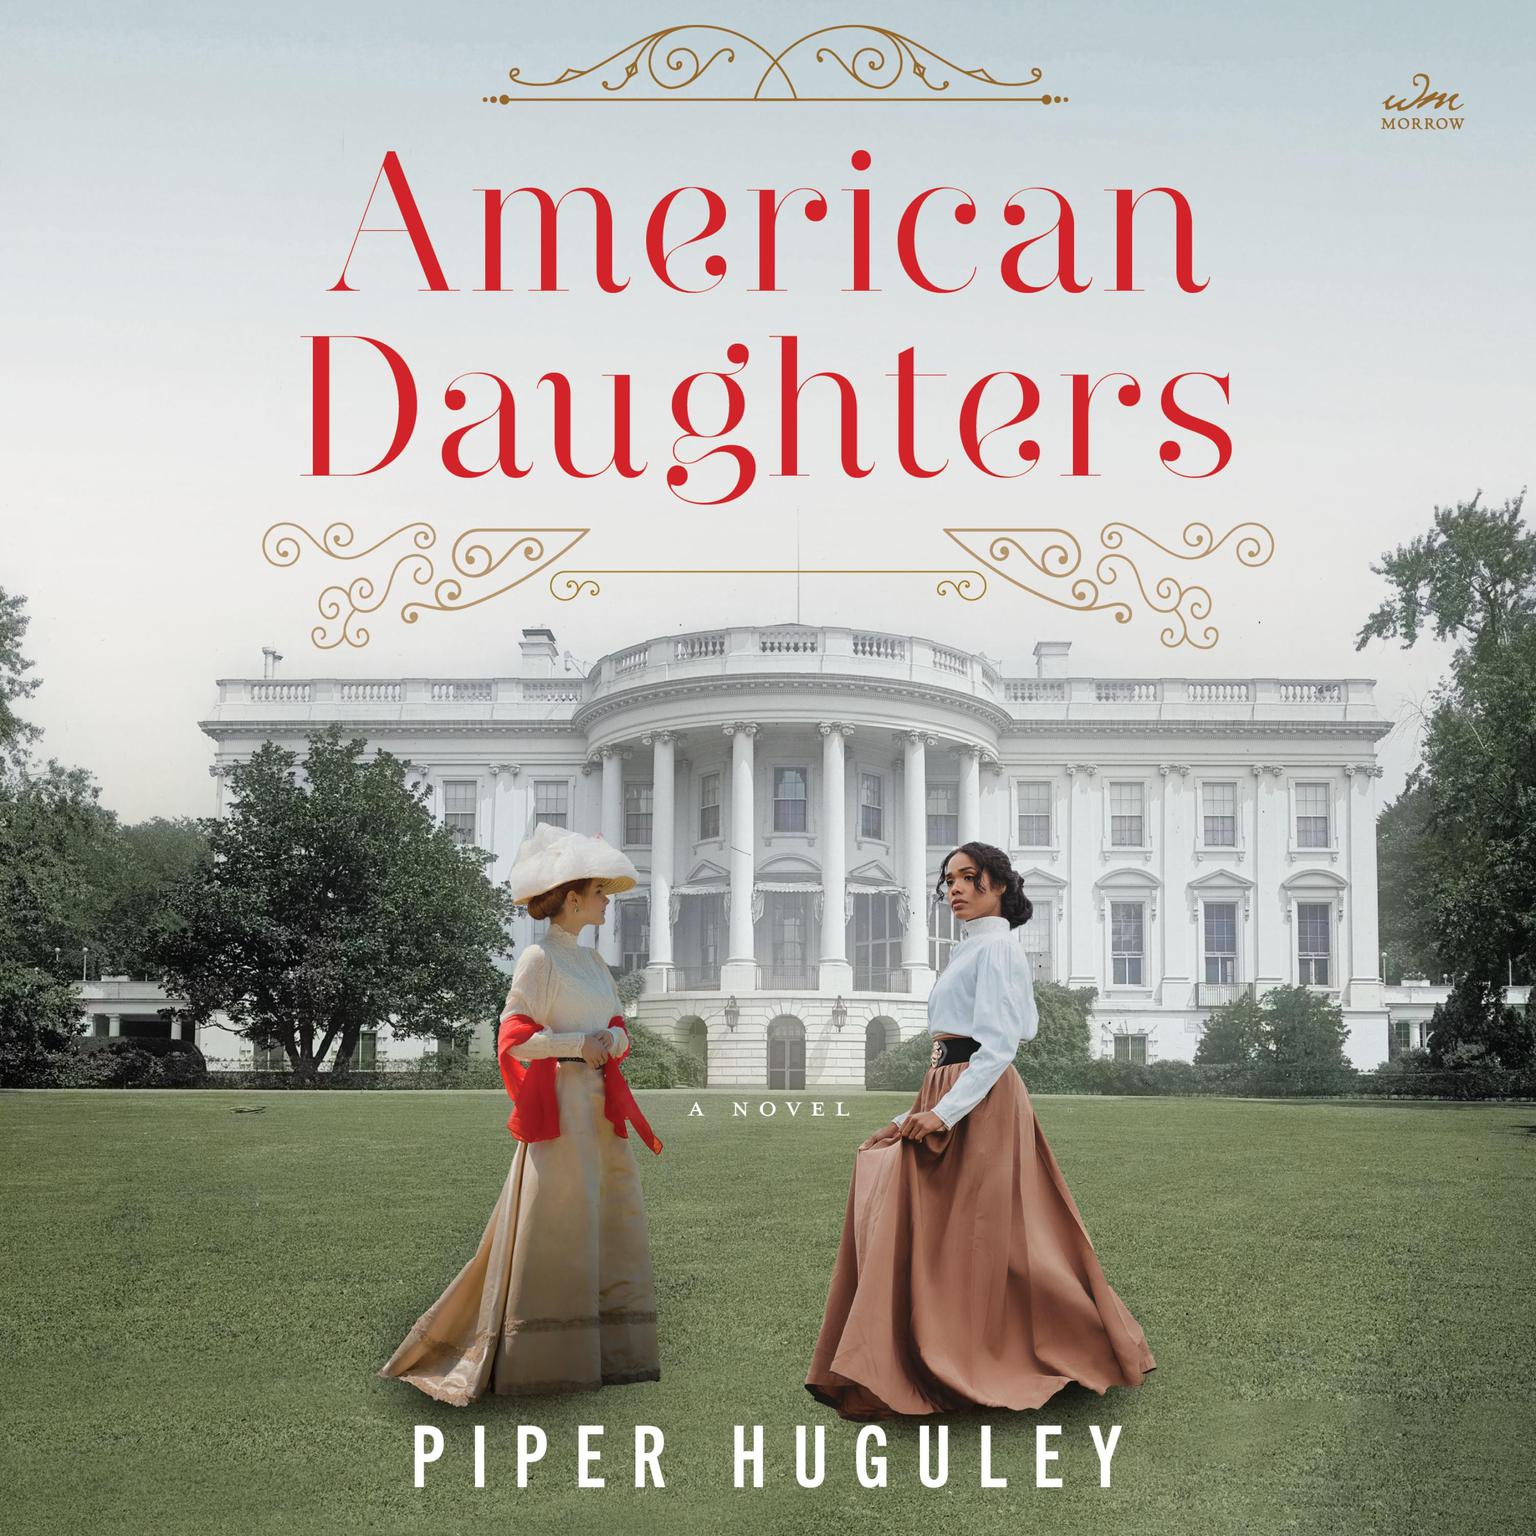 American Daughters: A Novel Audiobook, by Piper Huguley